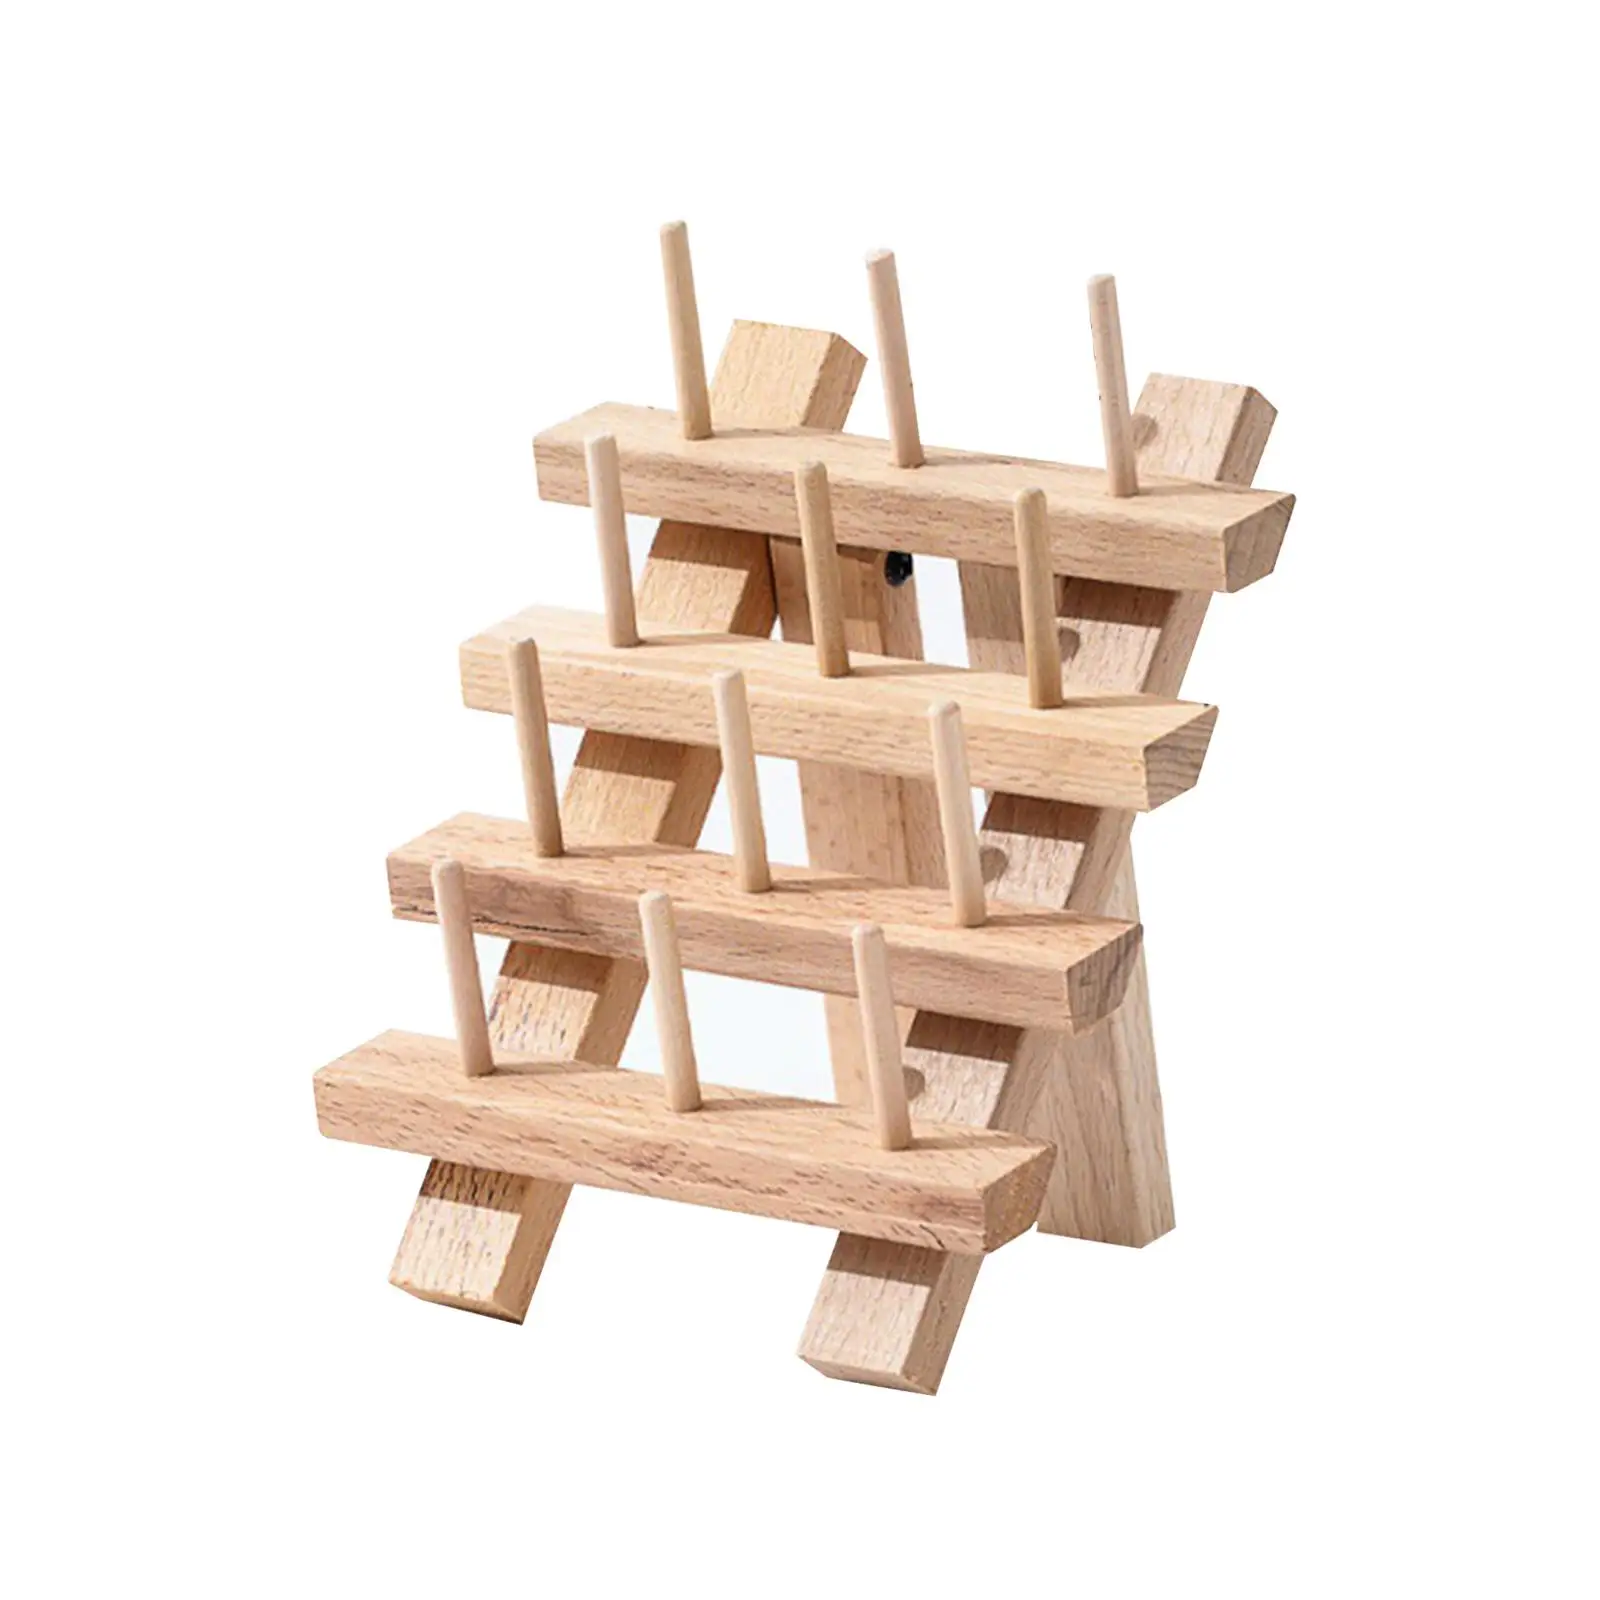 Sewing Thread Rack Holder Shelf Wooden Spool Rack for Jewelry Embroidery Hobbyists Thread Organizing Braid Knitting Tailors